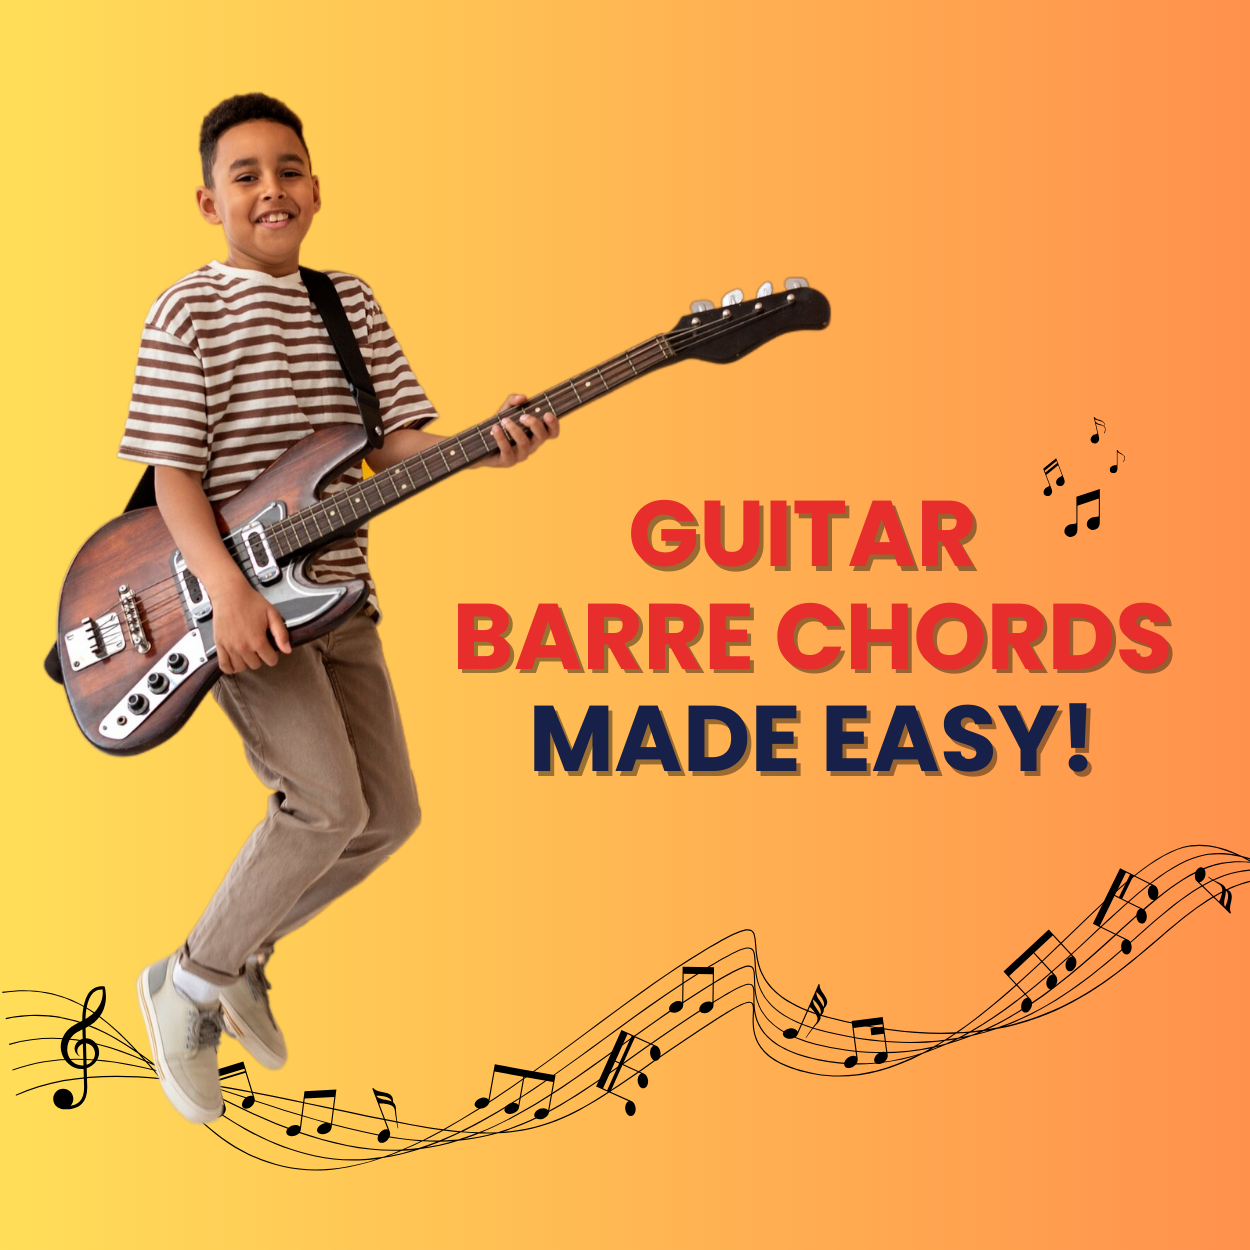 Guitar Barre Chords Made Easy!